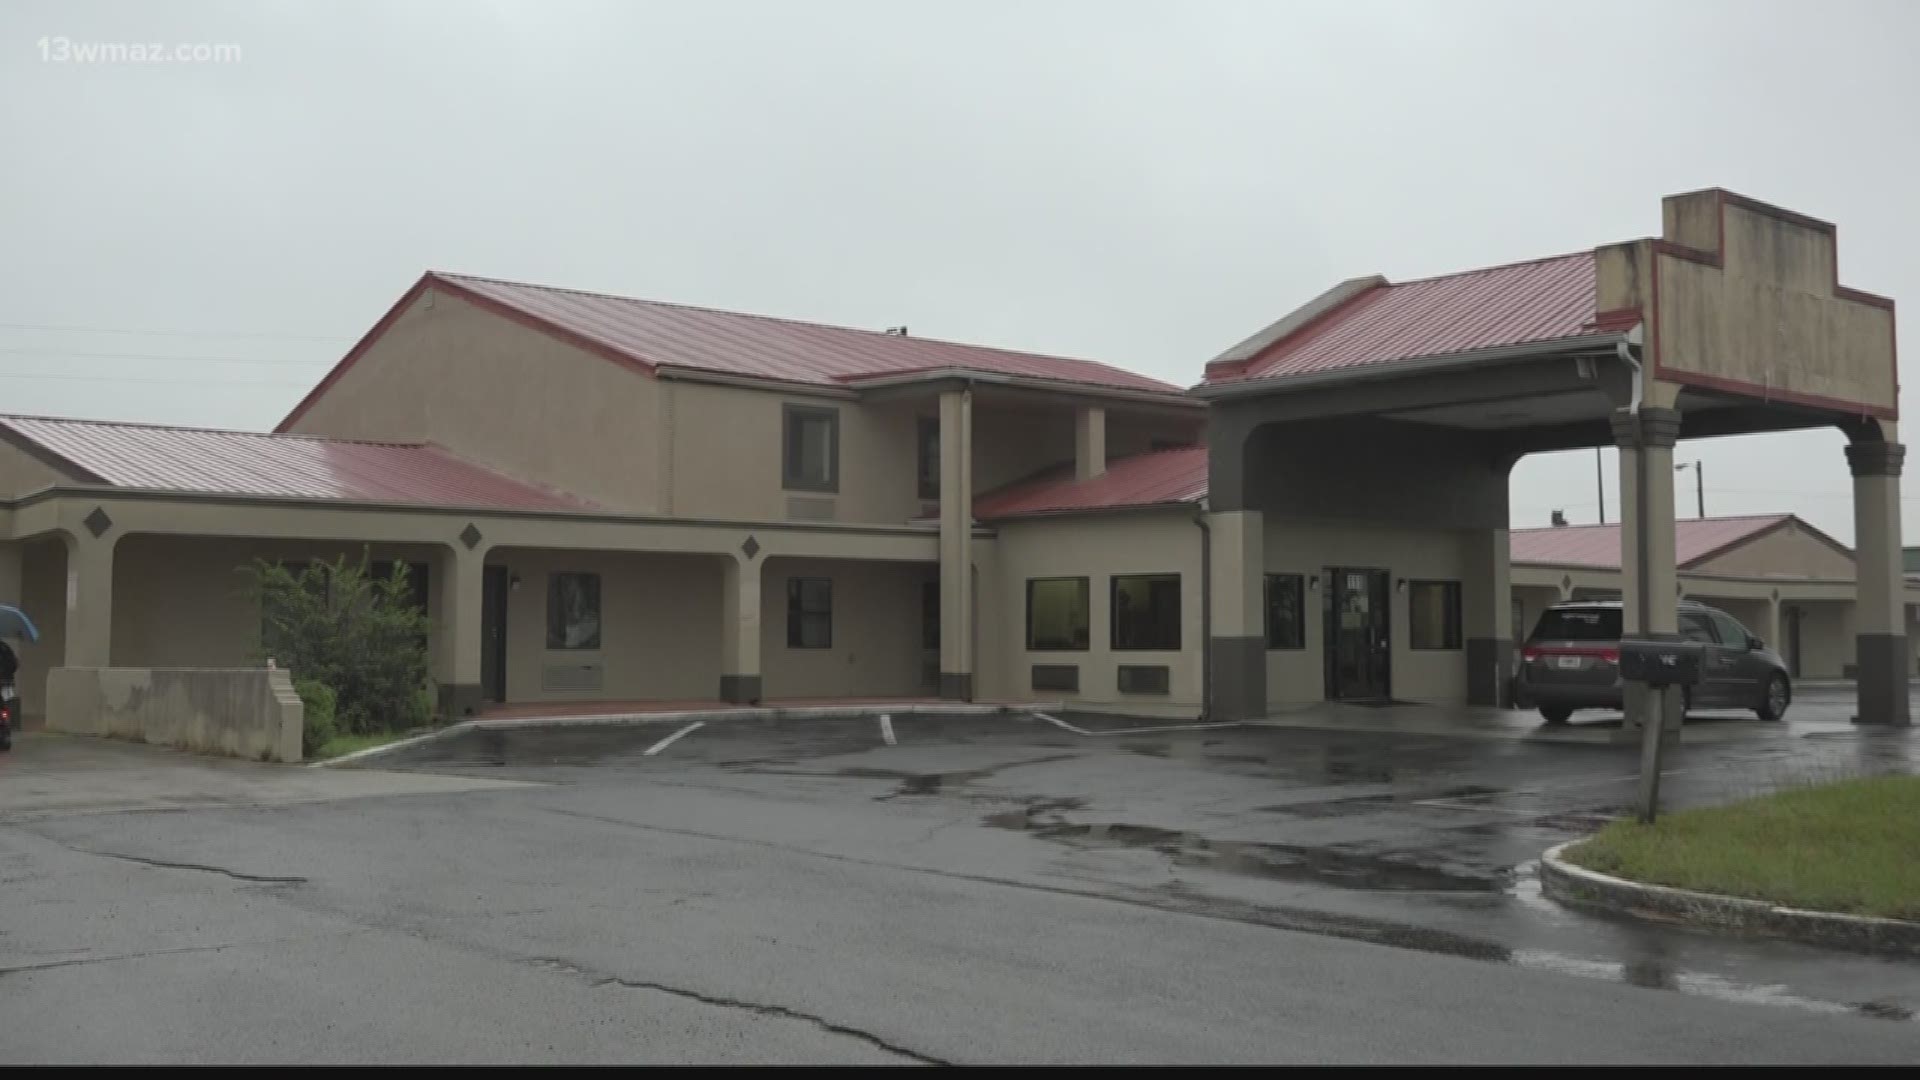 The Budget Inn on Chapman Road is closing after a number of health violations. Now residents are looking for a new place to live.